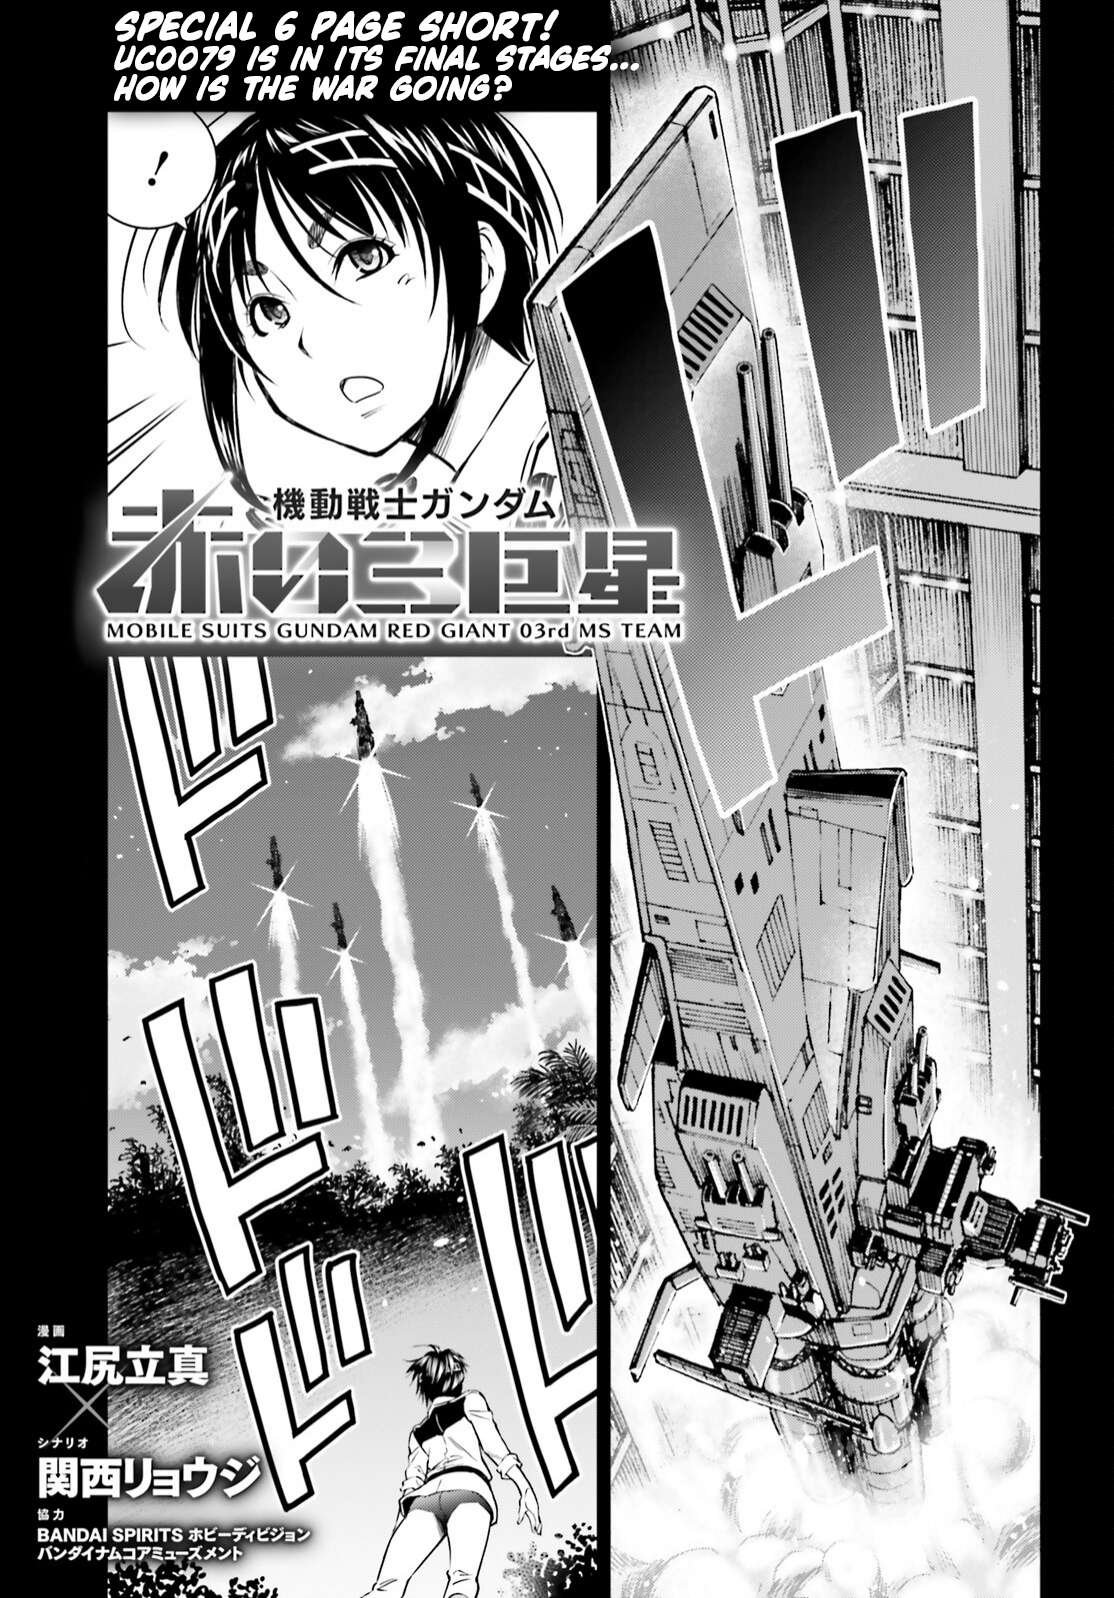 Mobile Suit Gundam: Red Giant 03Rd Ms Team - chapter 5.5 - #1